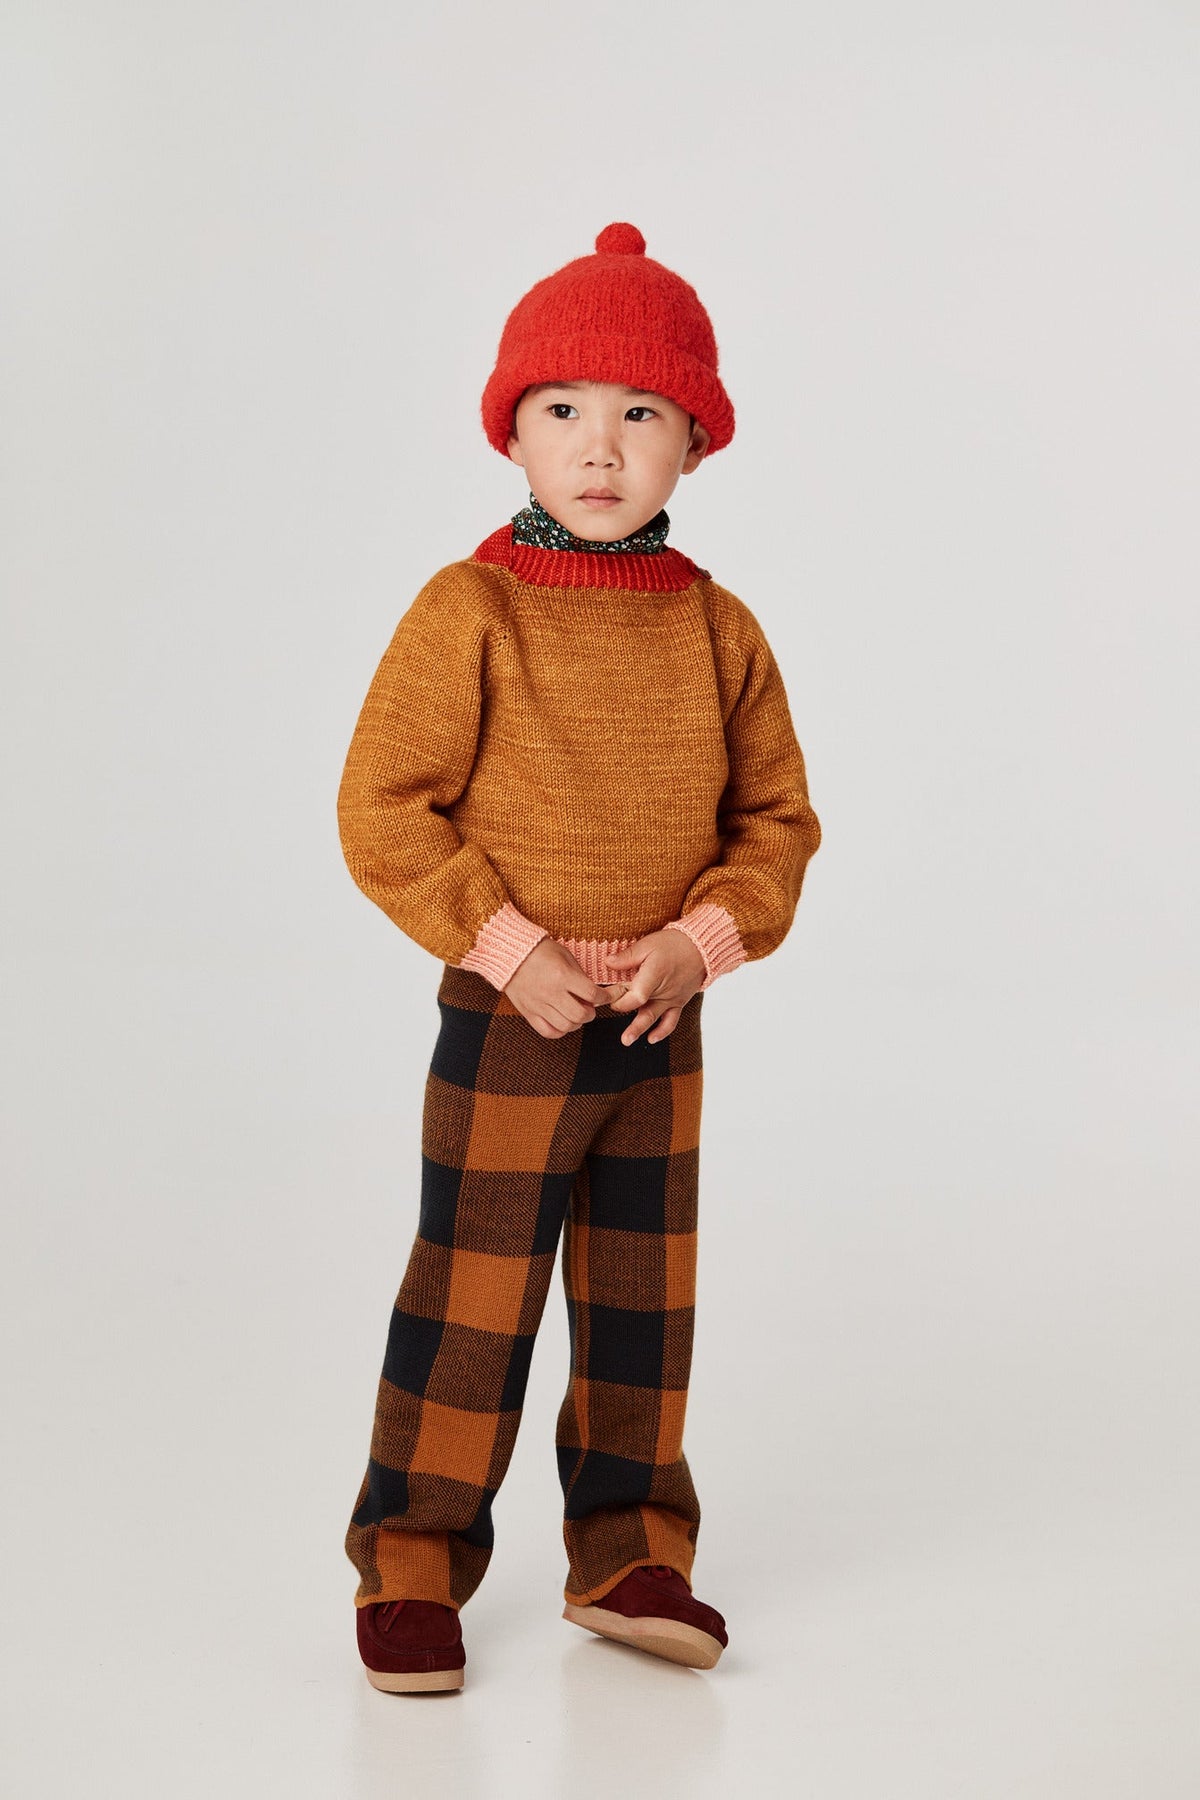 Plaid Slim Pant - Marigold+Model is 39 inches tall, 32lbs, wearing a size 3-4y